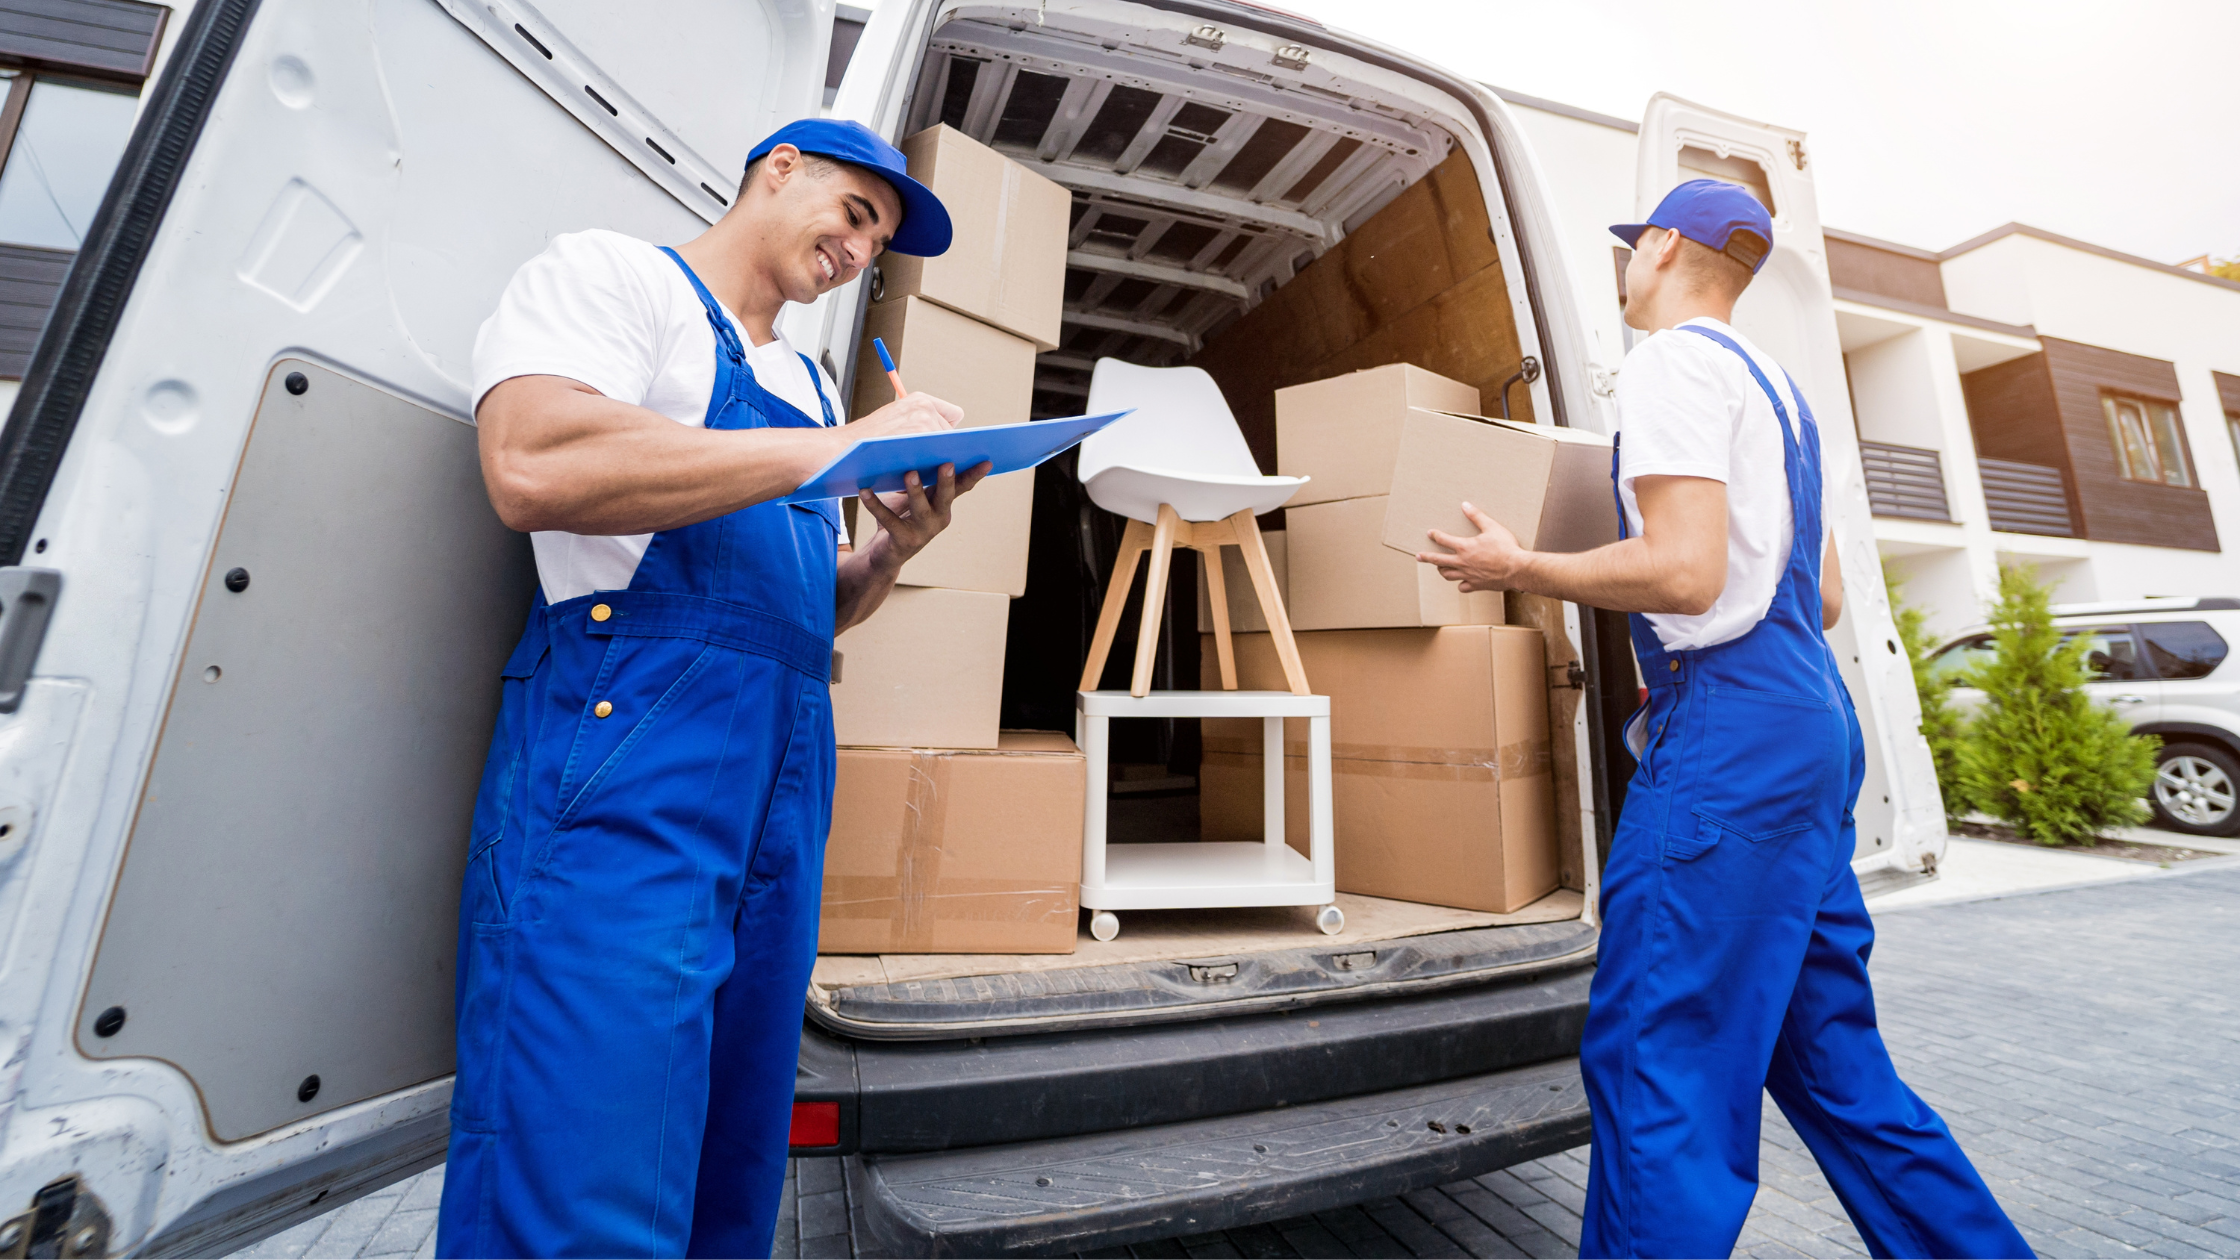 How to Start a Courier Business